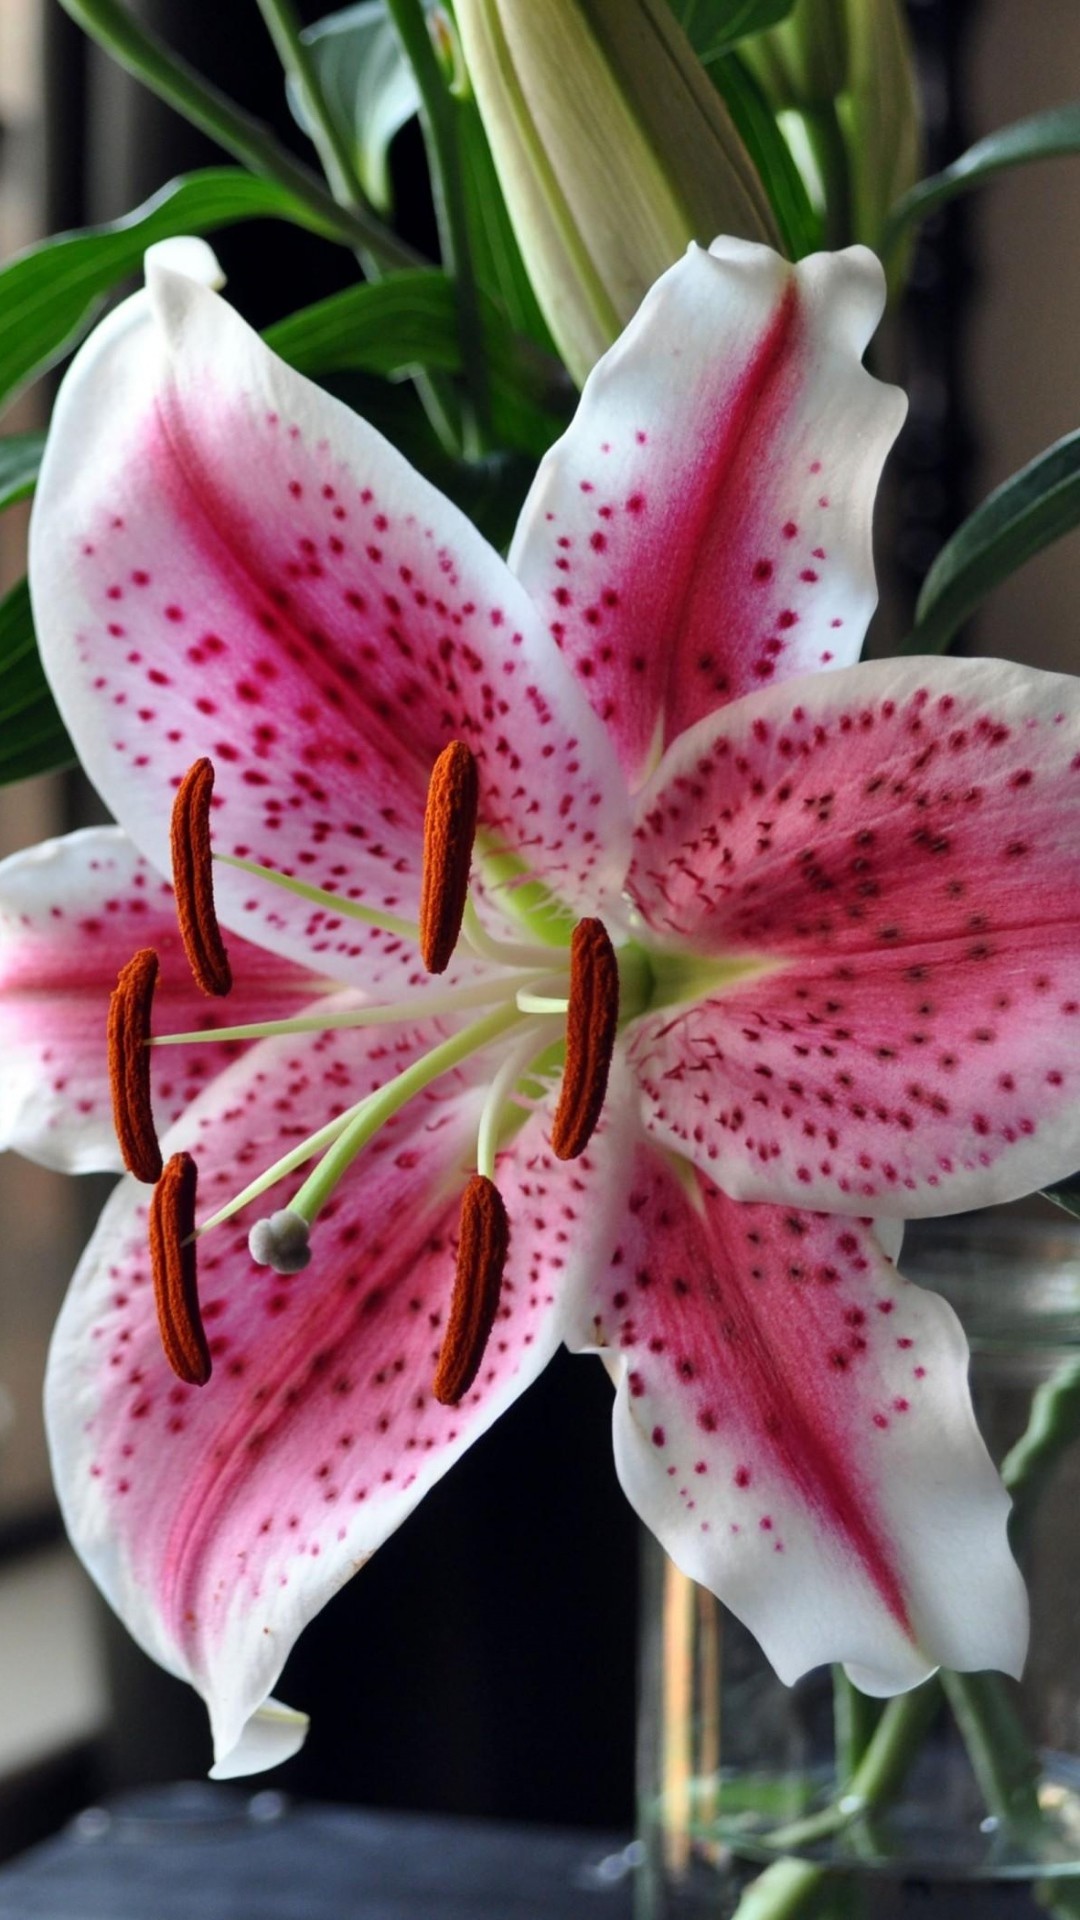 1080x1920 Explore Stargazer Lilies, Flowers Vase, and more!